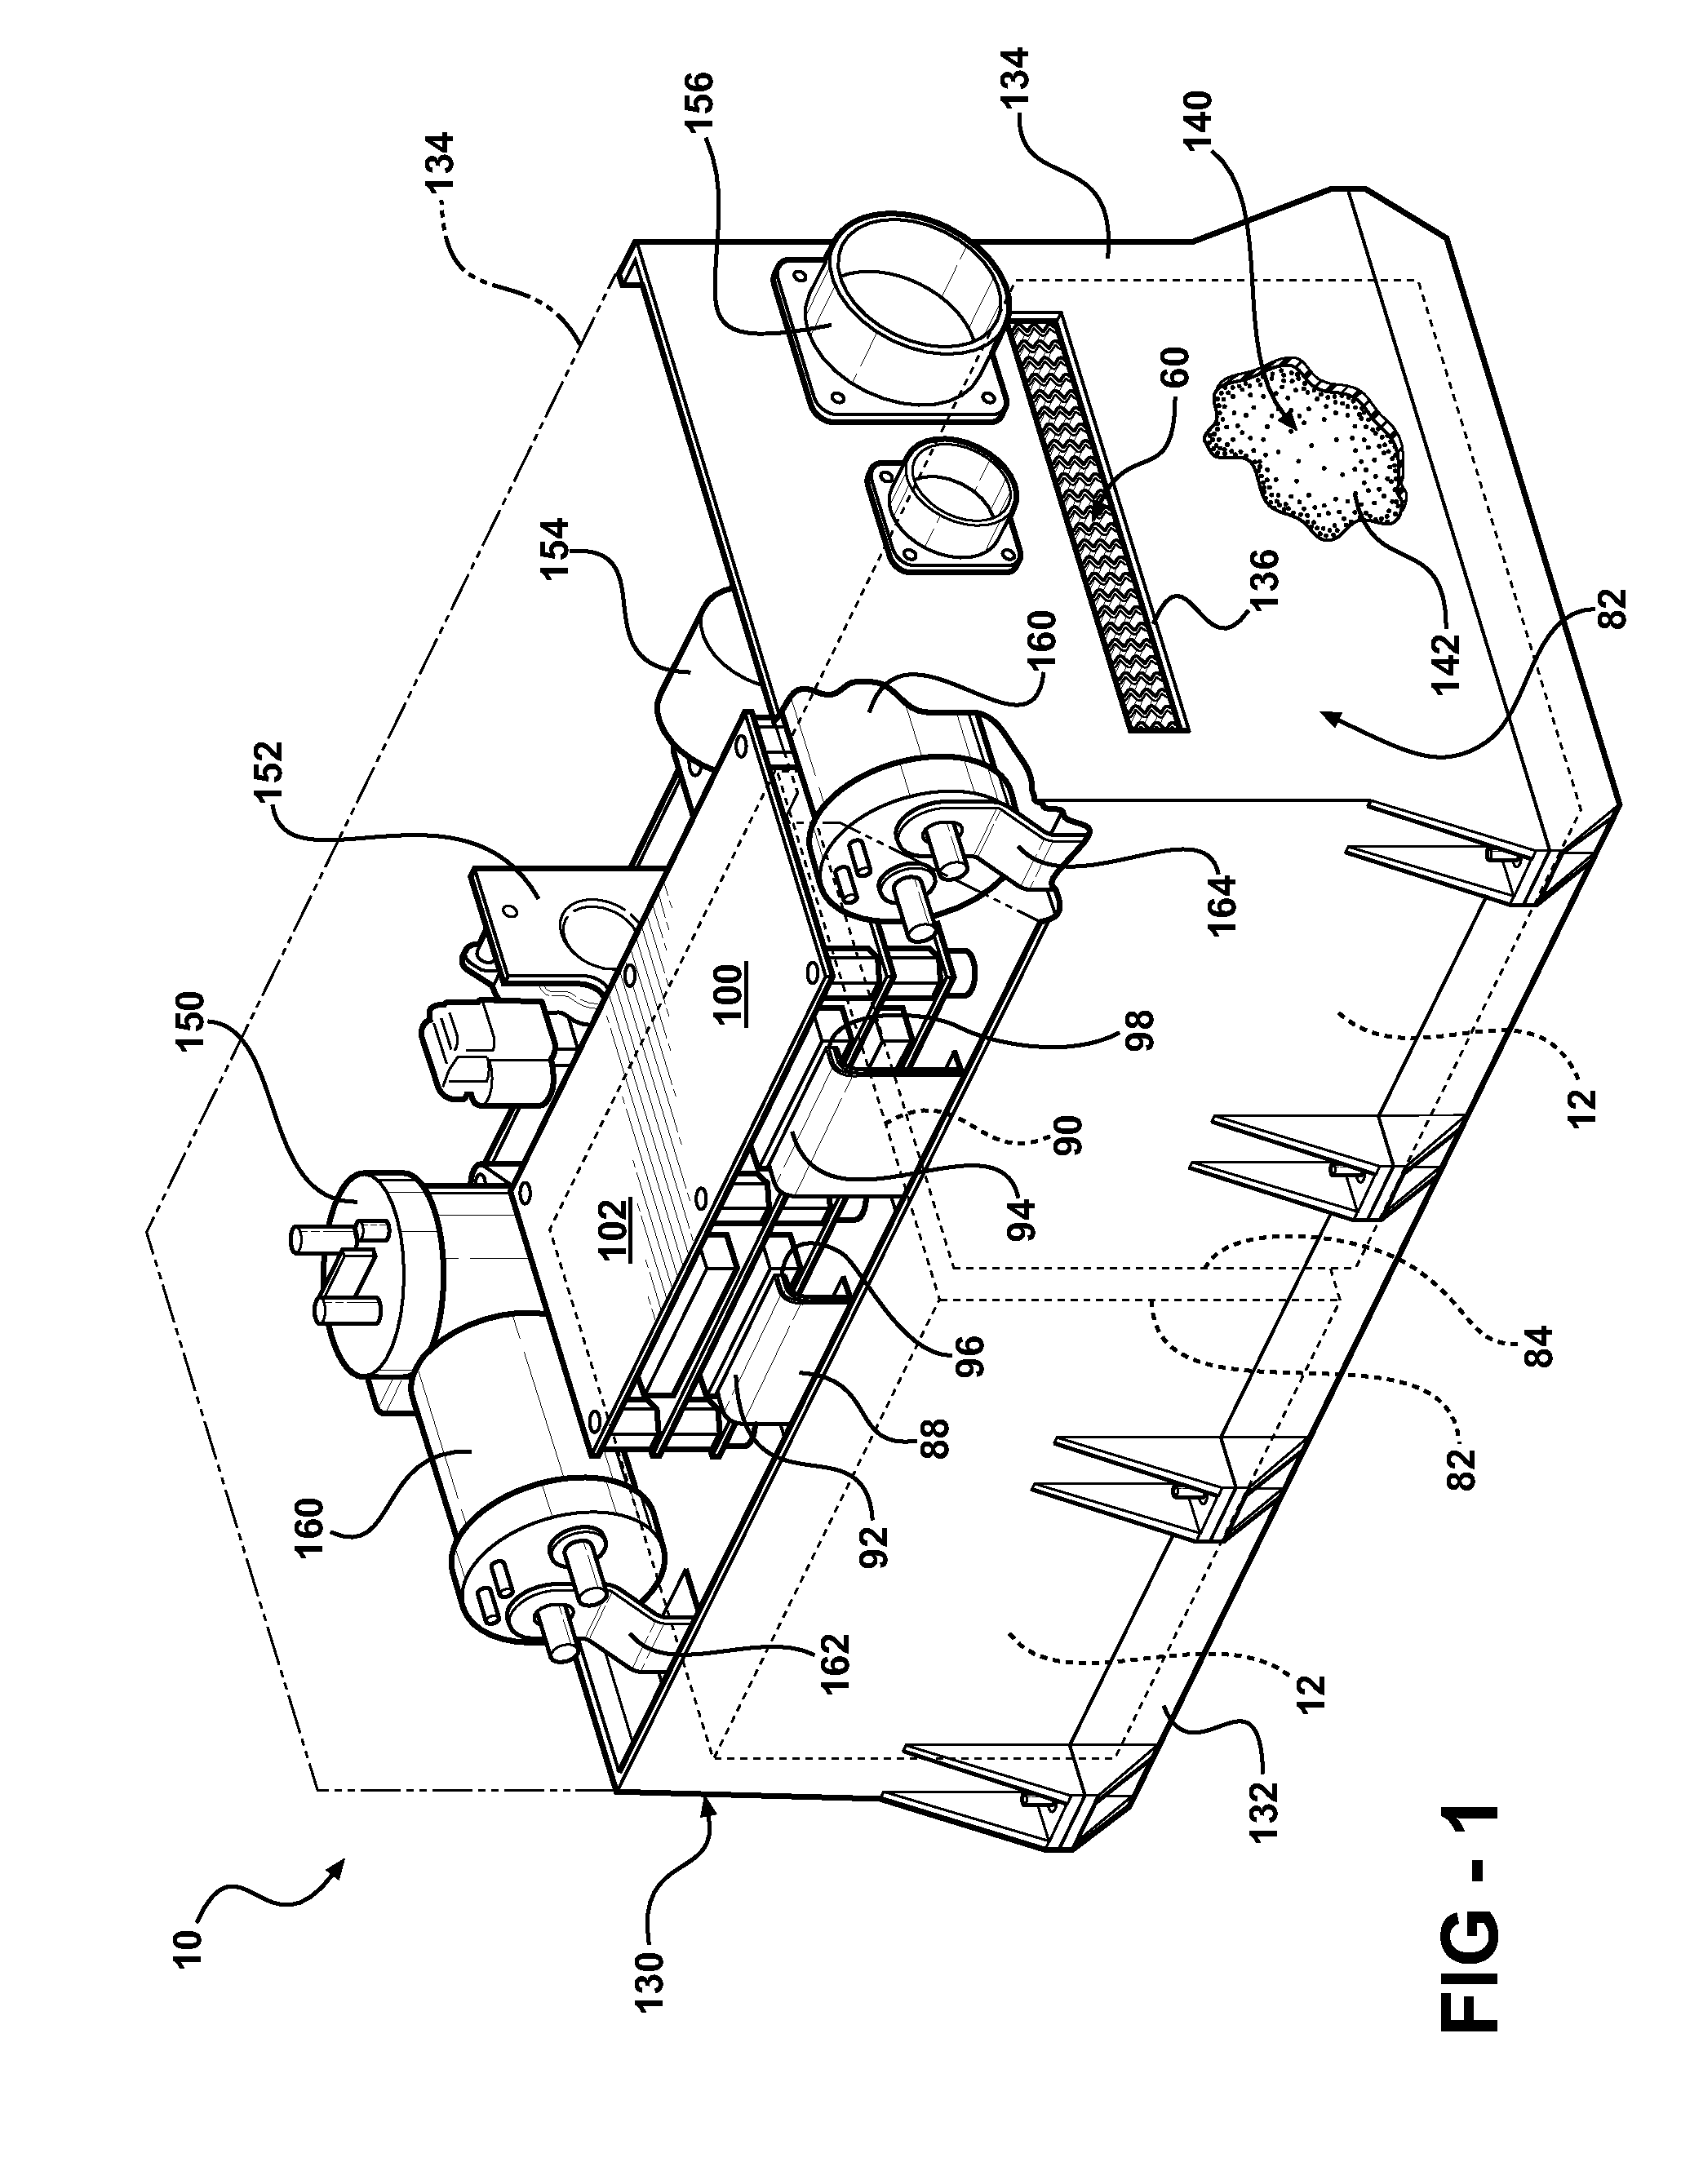 Battery pack with integral cooling and bussing devices